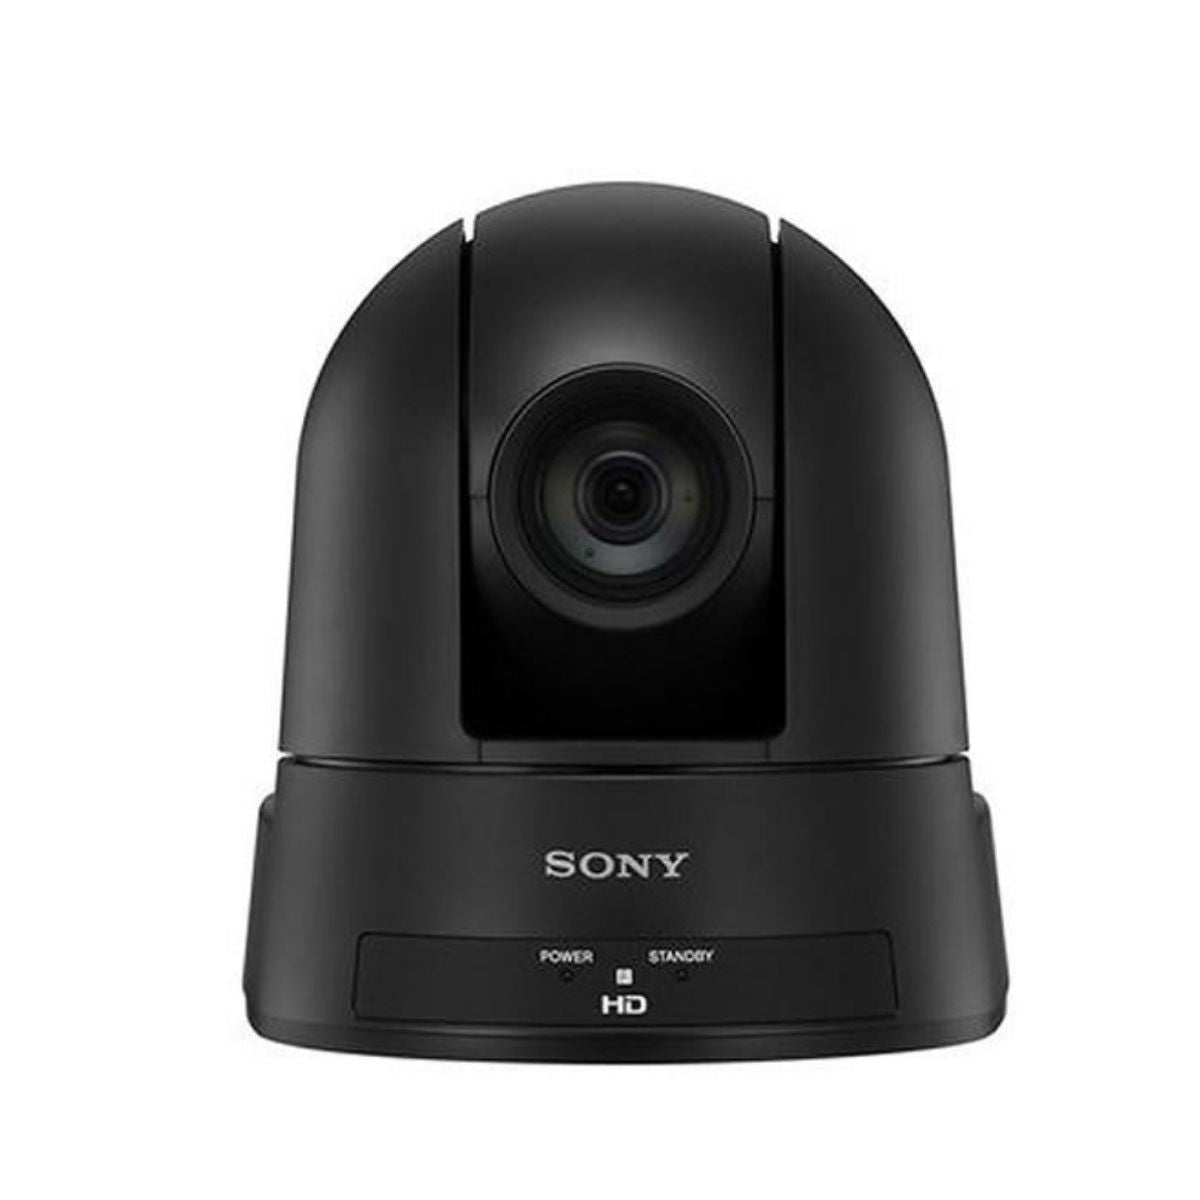 Sony SRG-300H Full HD remotely operated PTZ camera